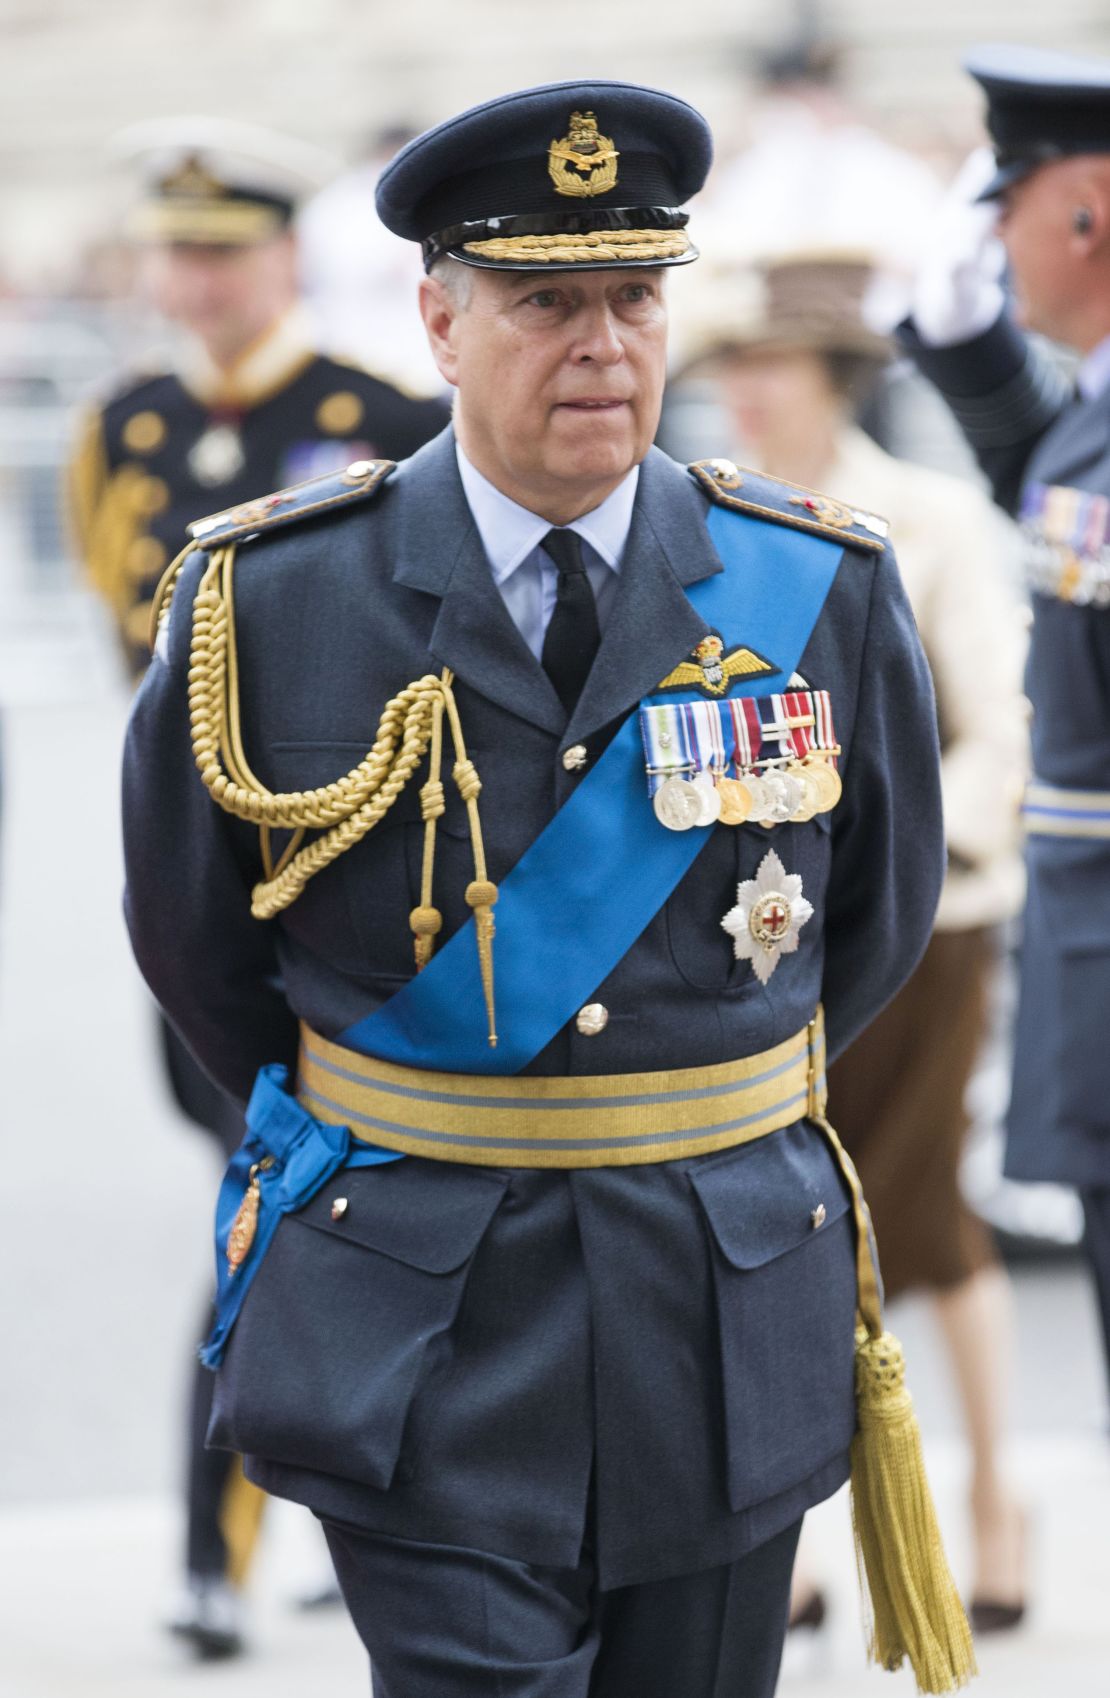 The Duke of York at the 100th Anniversary Ceremony of The Royal Air Force at Westminster Abbey on July 10, 2018 